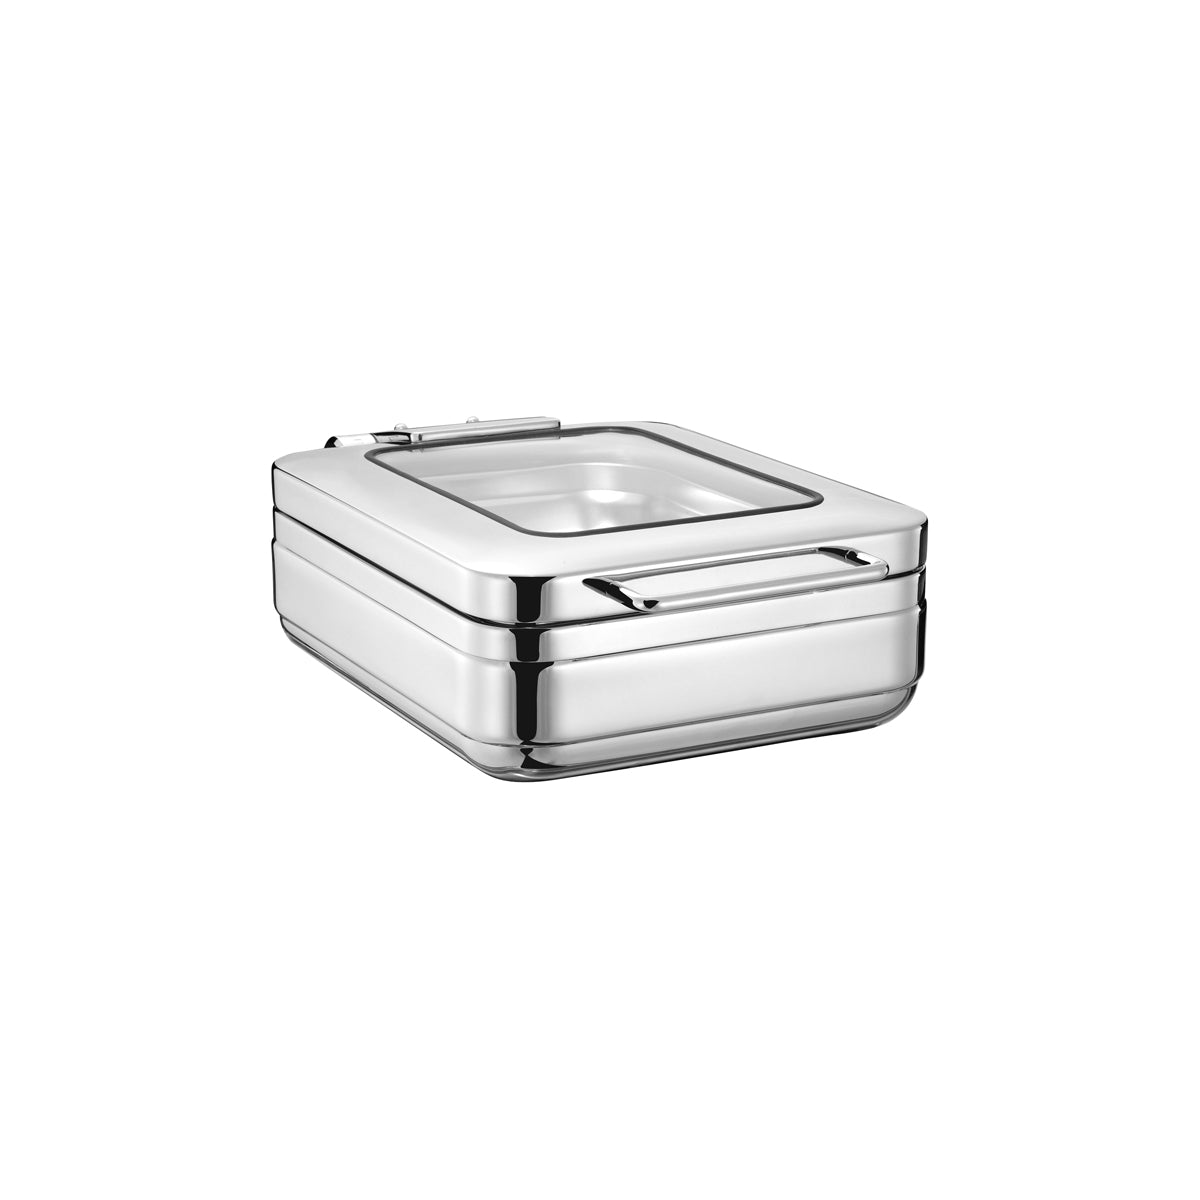 54902 Chef Inox Induction Chafer 18/8 Stainless Steel 1/2 Size with Glass Lid Tomkin Australia Hospitality Supplies